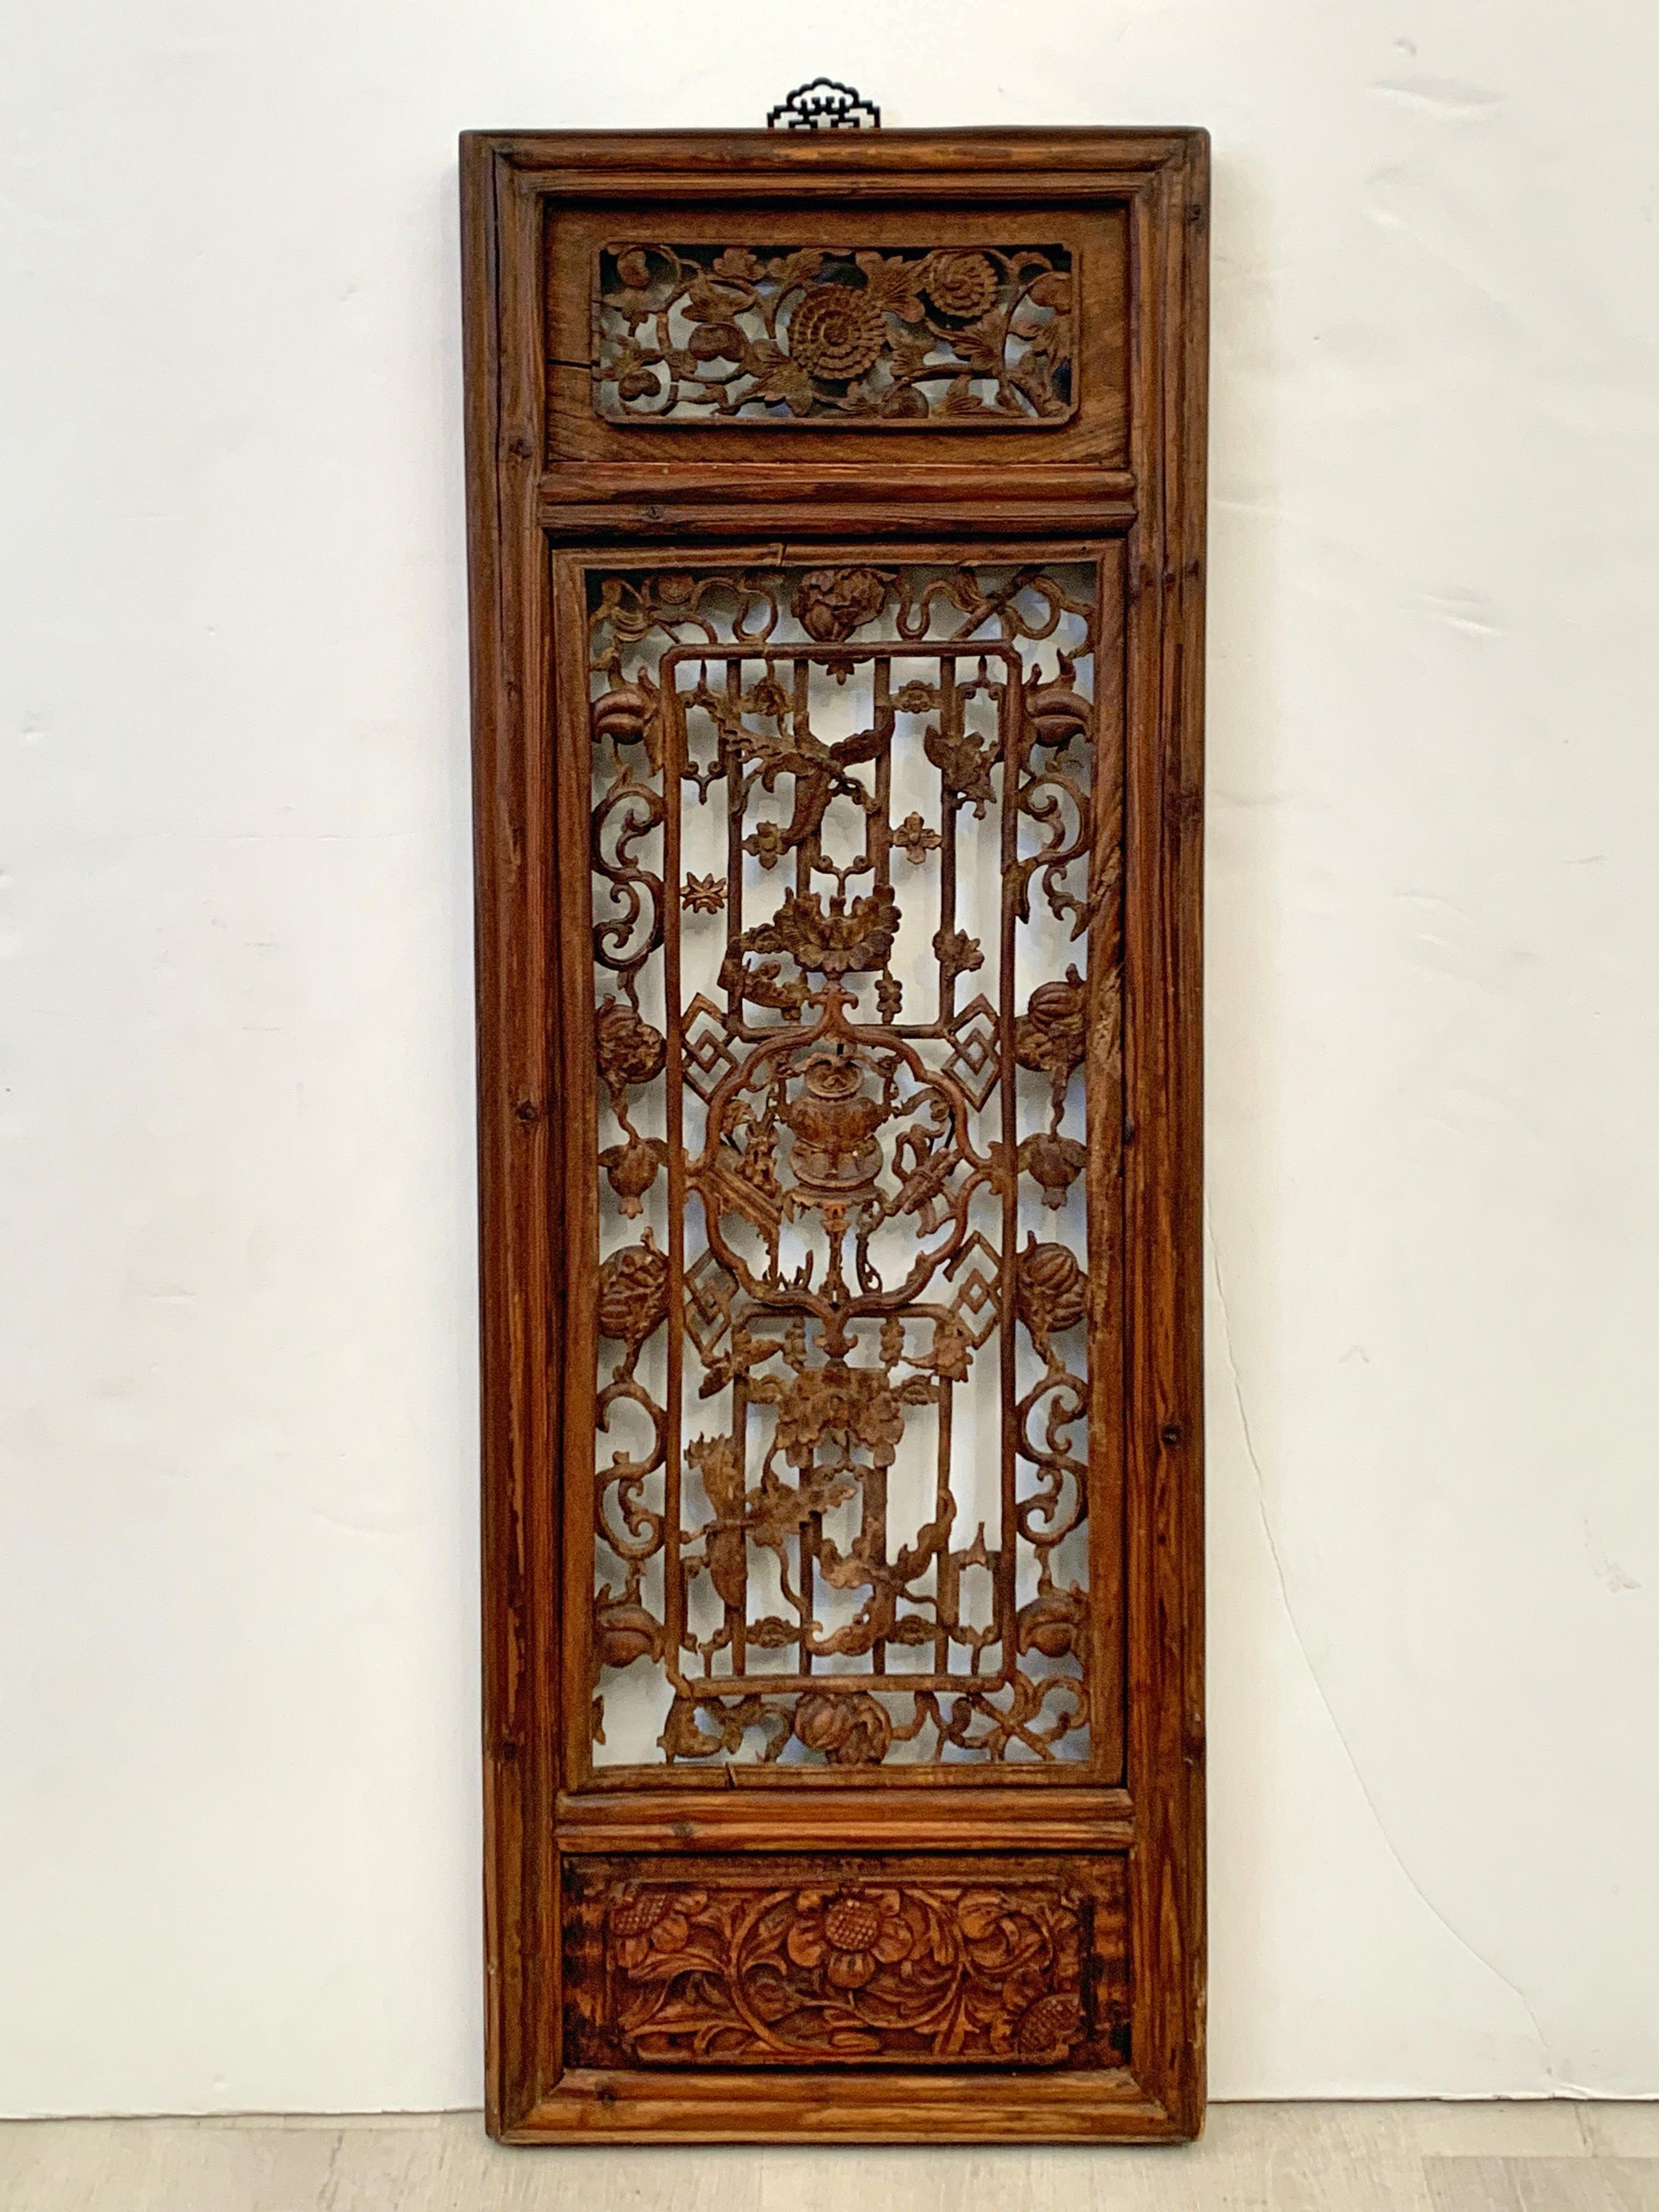 A very well carved pair of 18th century Chinese Qing Dynasty carved camphor wood window screen panels.

The camphor wood panels finely carved and pierced, and joined, featuring auspicious motifs throughout. The panels featuring intricate and